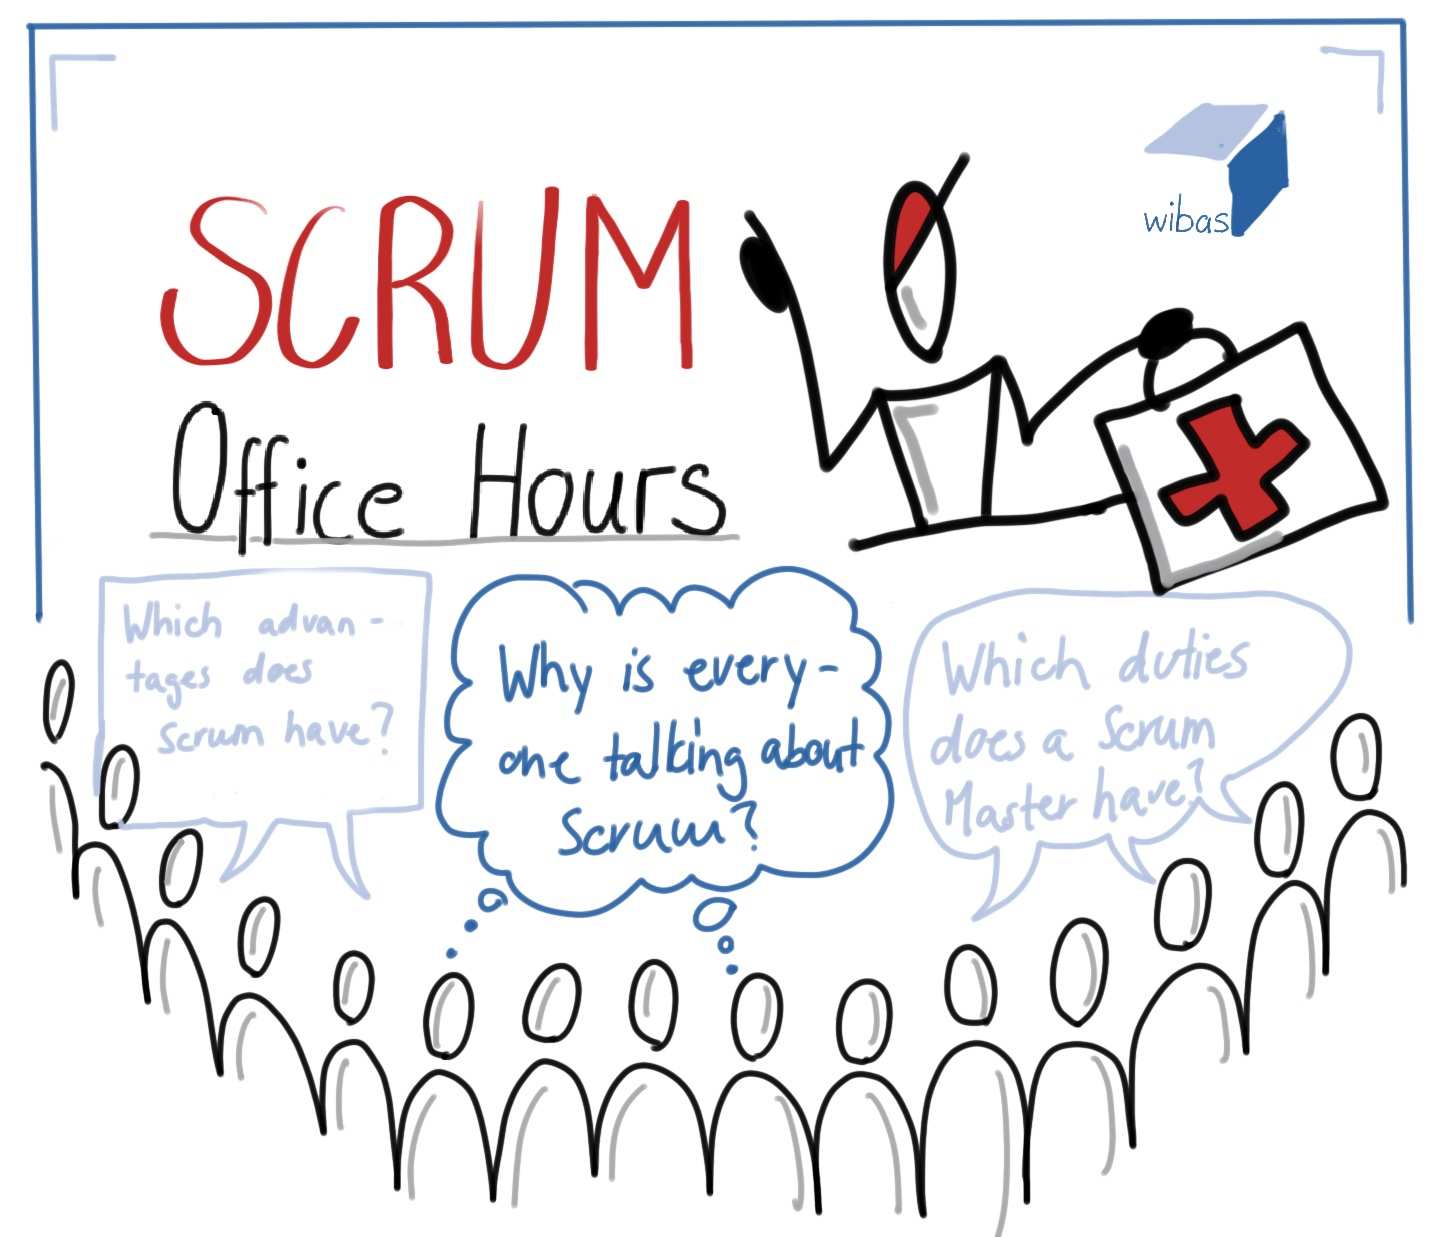 Scrum office hours typical questions asked